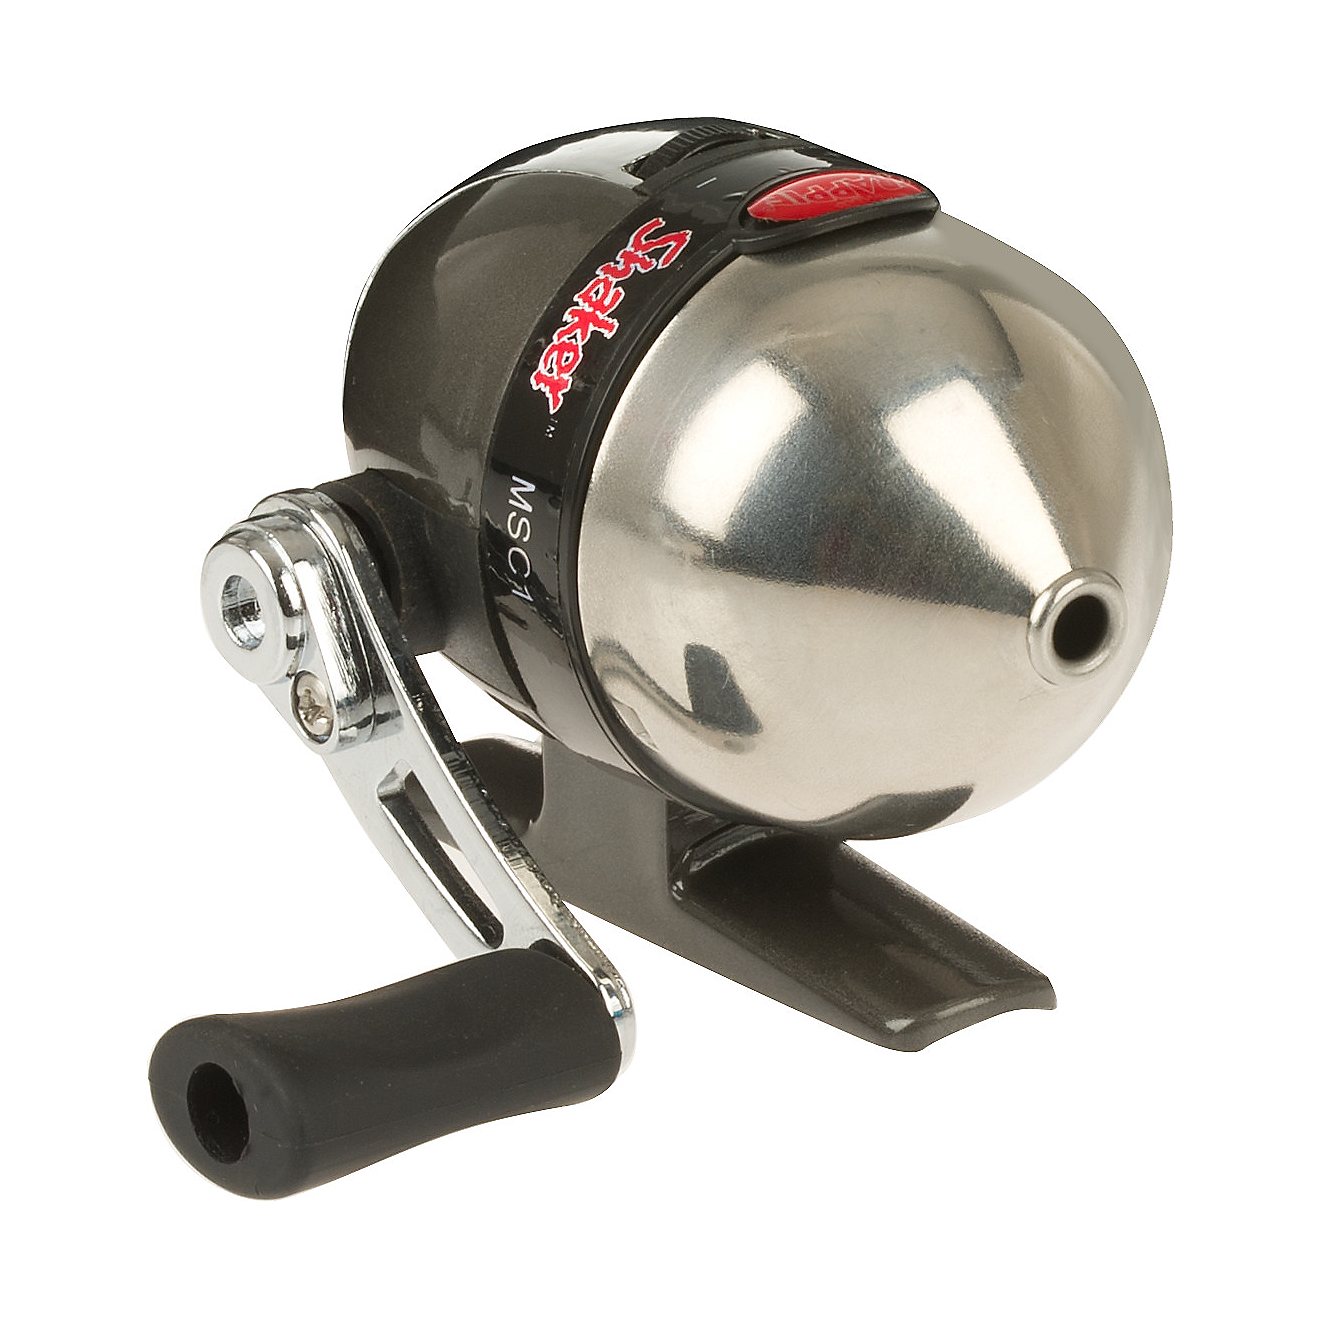 Mr. Crappie® Stab Shaker Spincast Reel Convertible                                                                              - view number 1